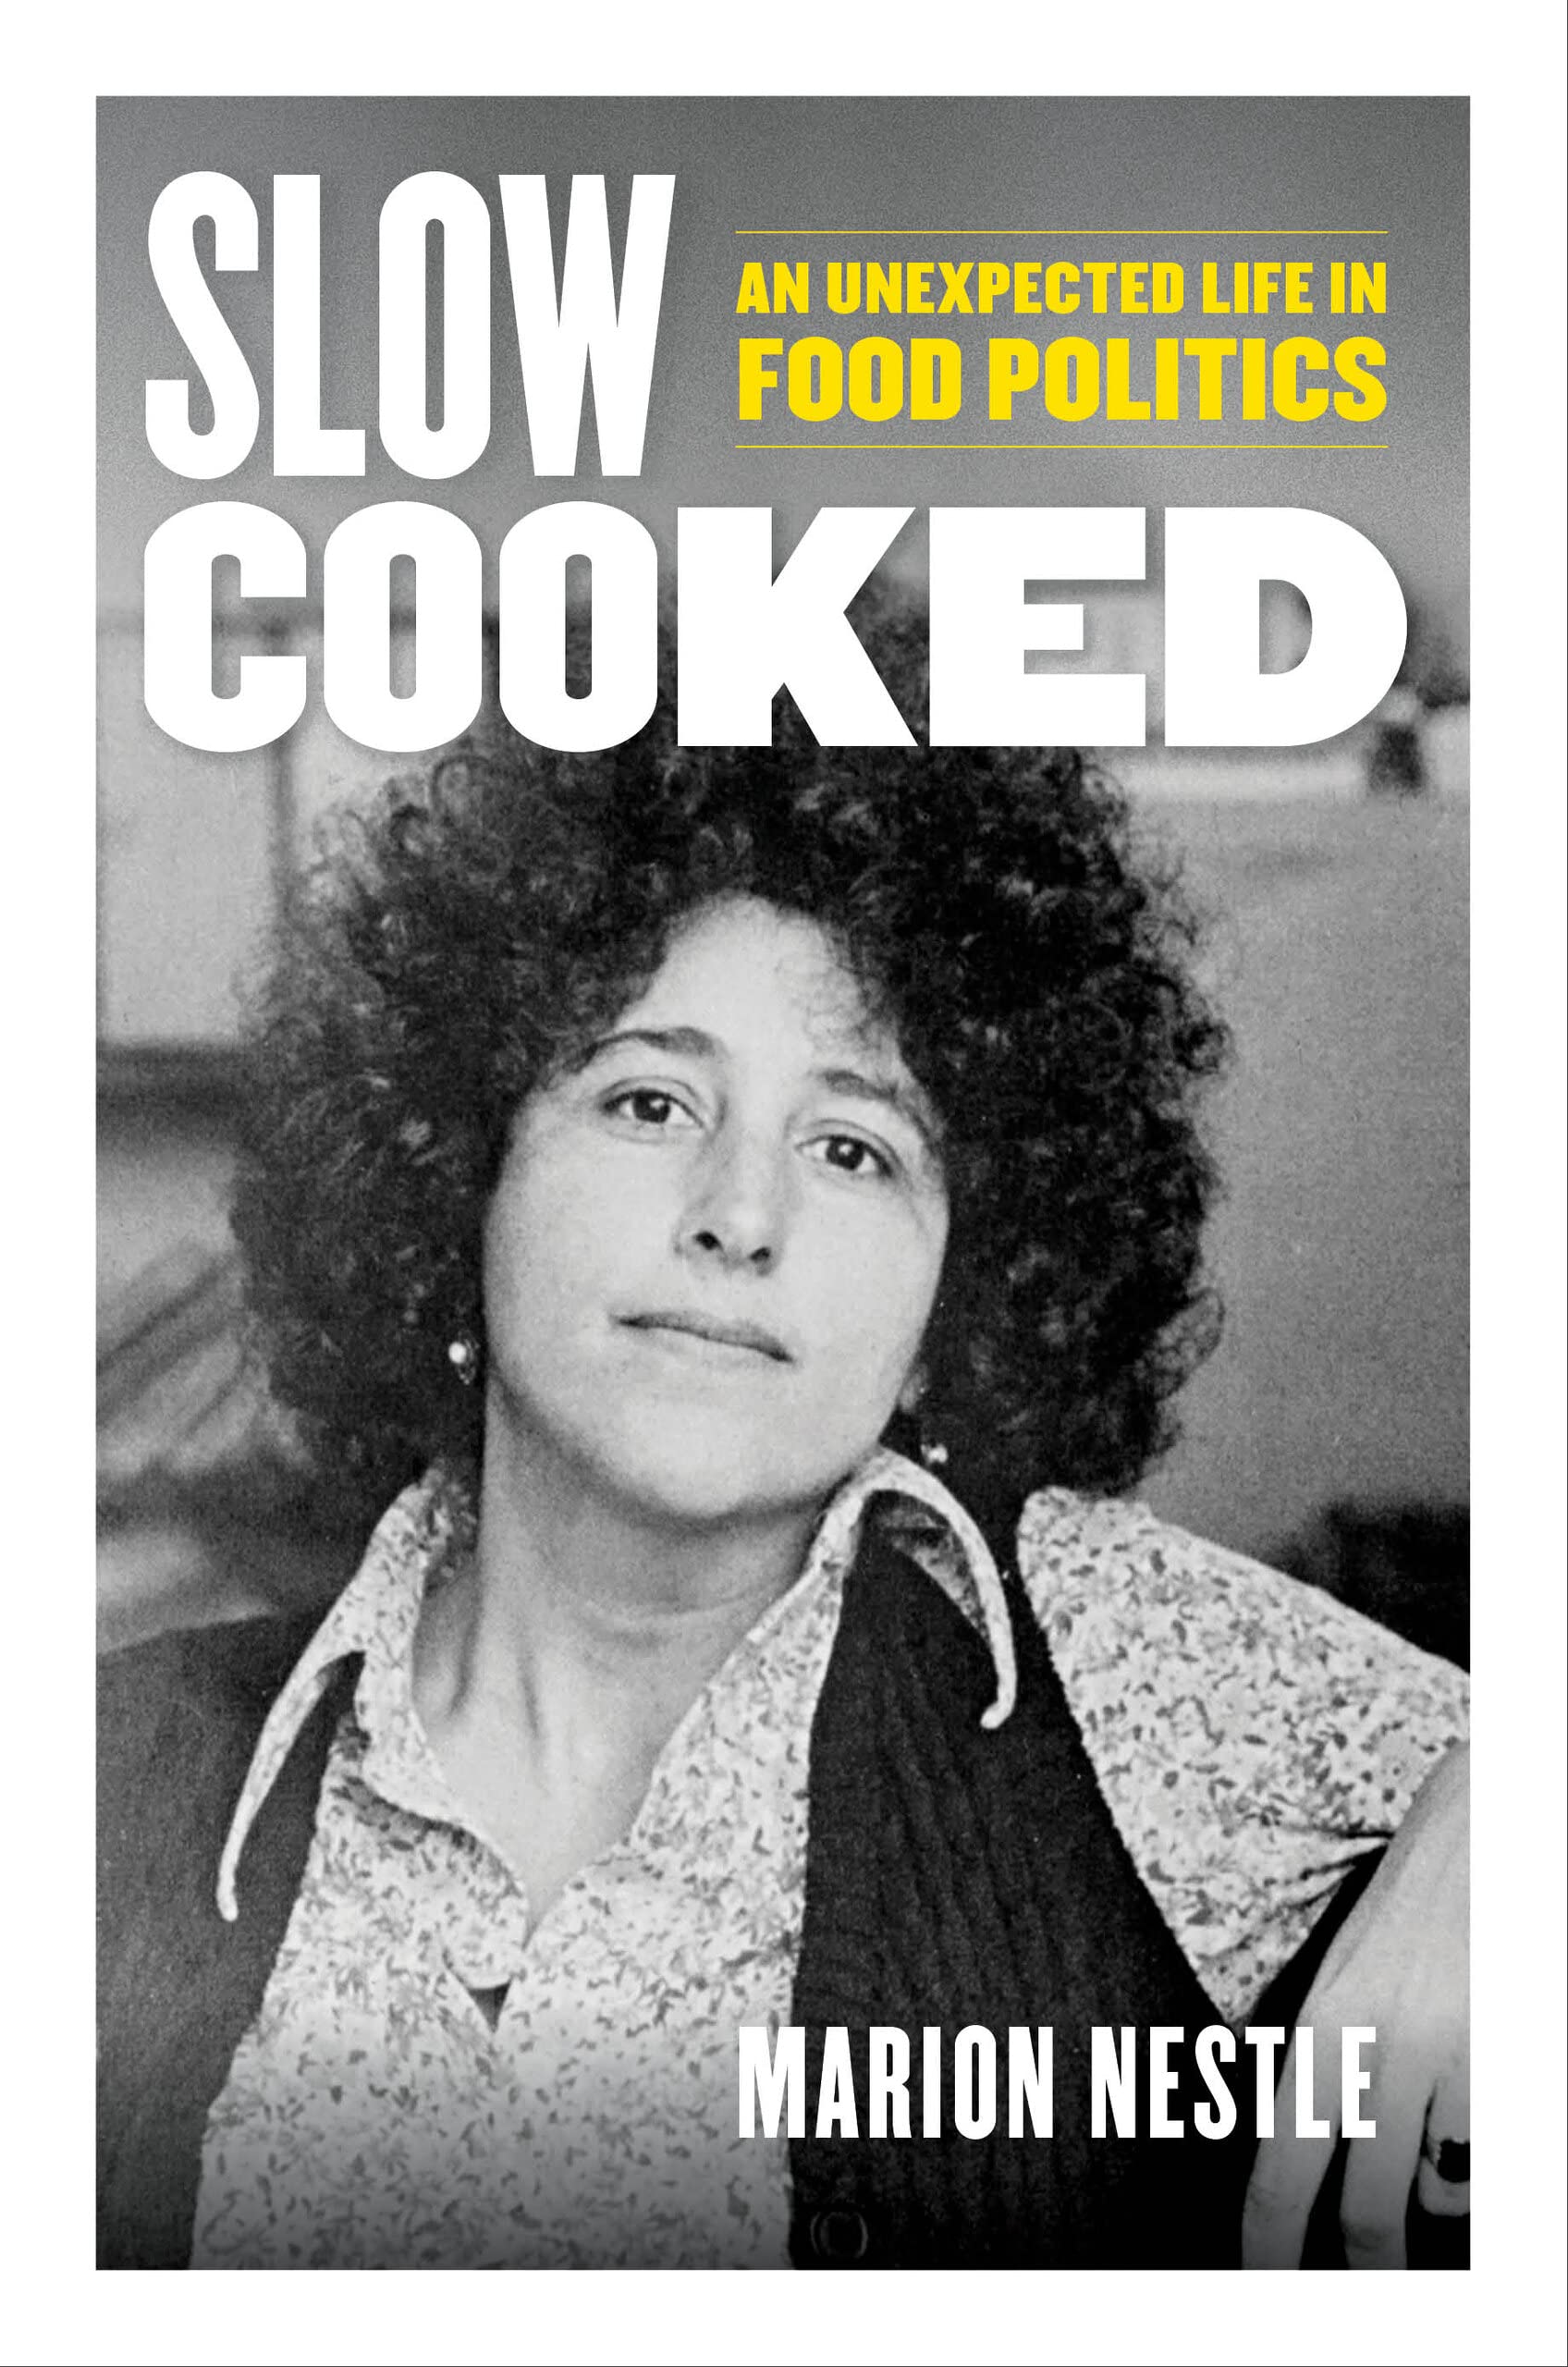 Slow Cooked: An Unexpected Life in Food Politics (Marion Nestle) *Signed*